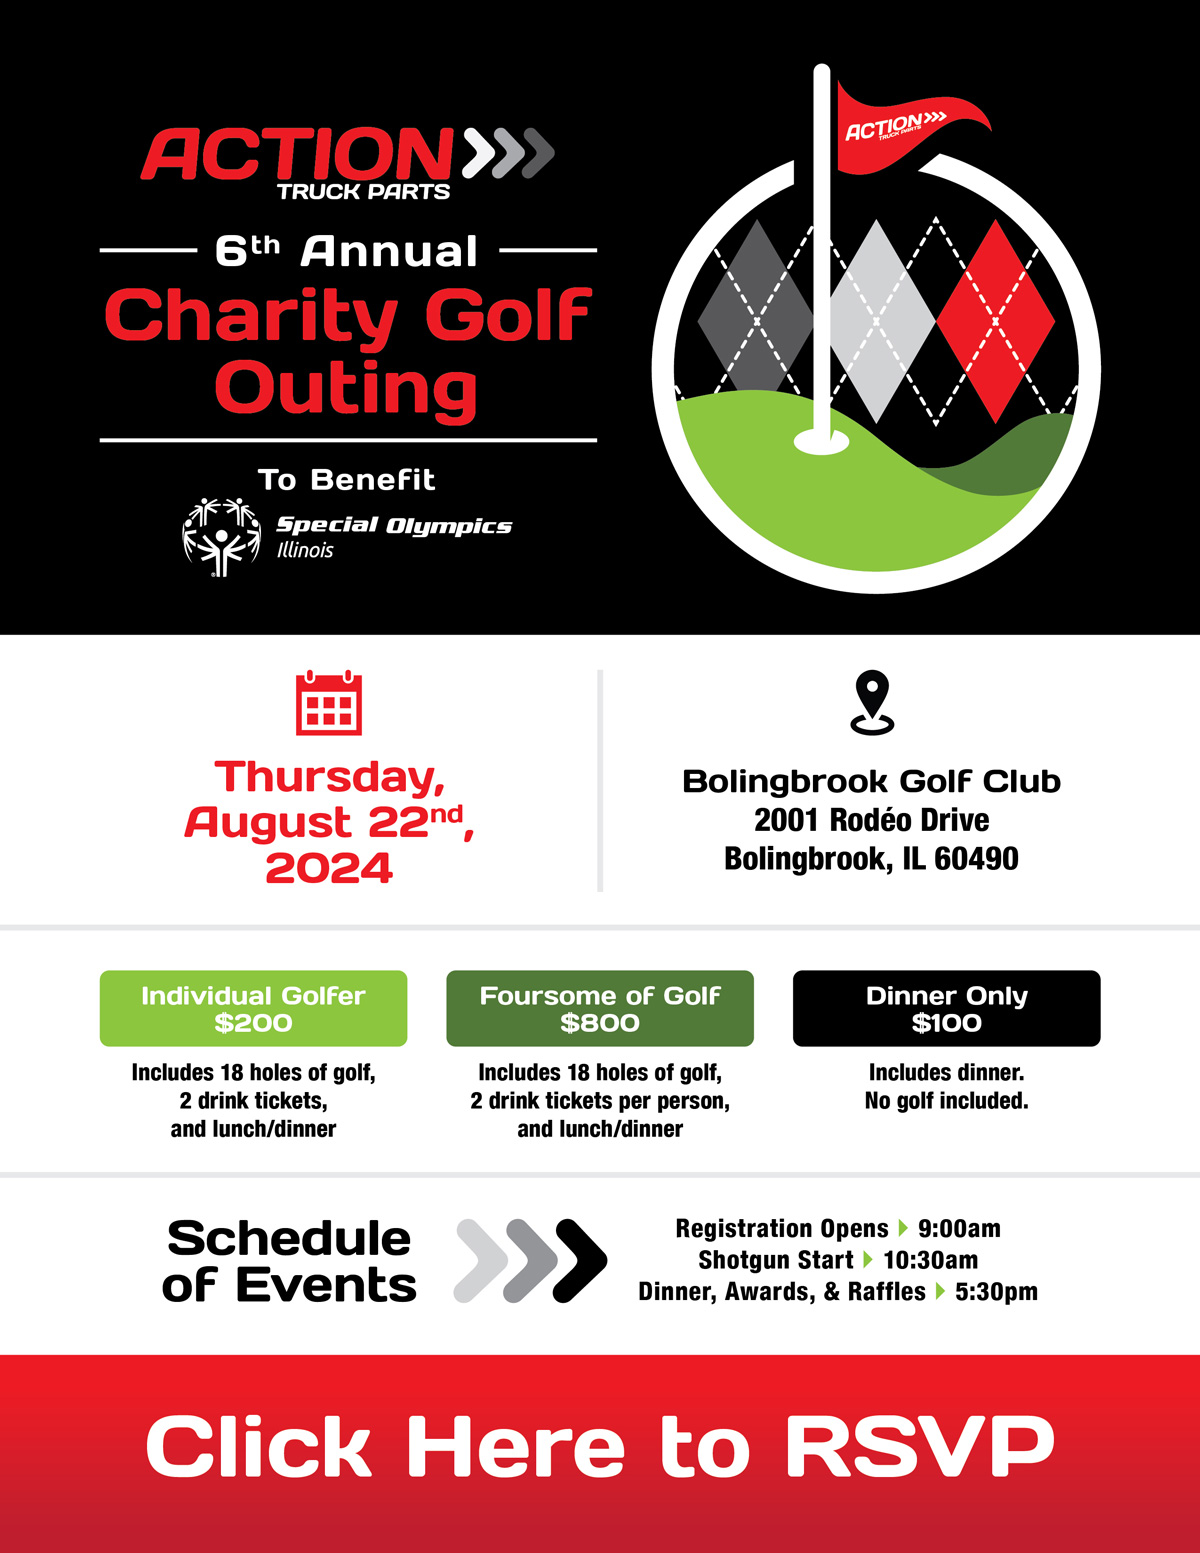 6th Annual Charity Golf Outing